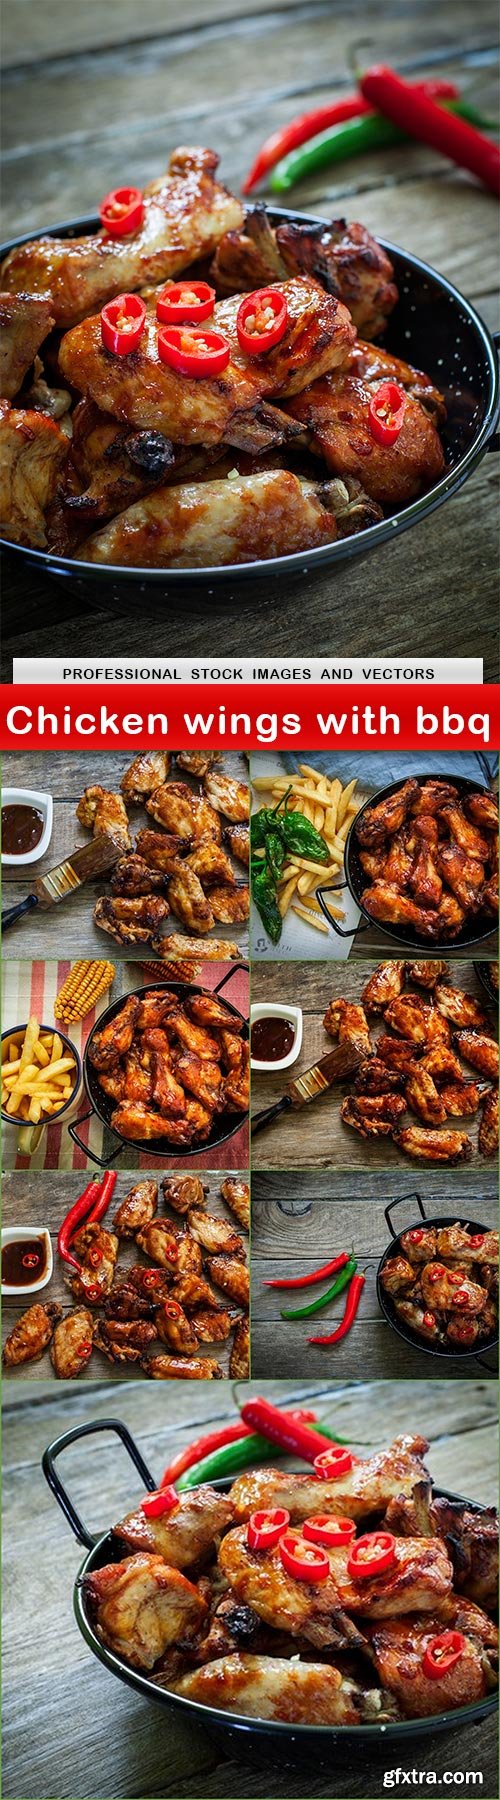 Chicken wings with bbq - 8 UHQ JPEG